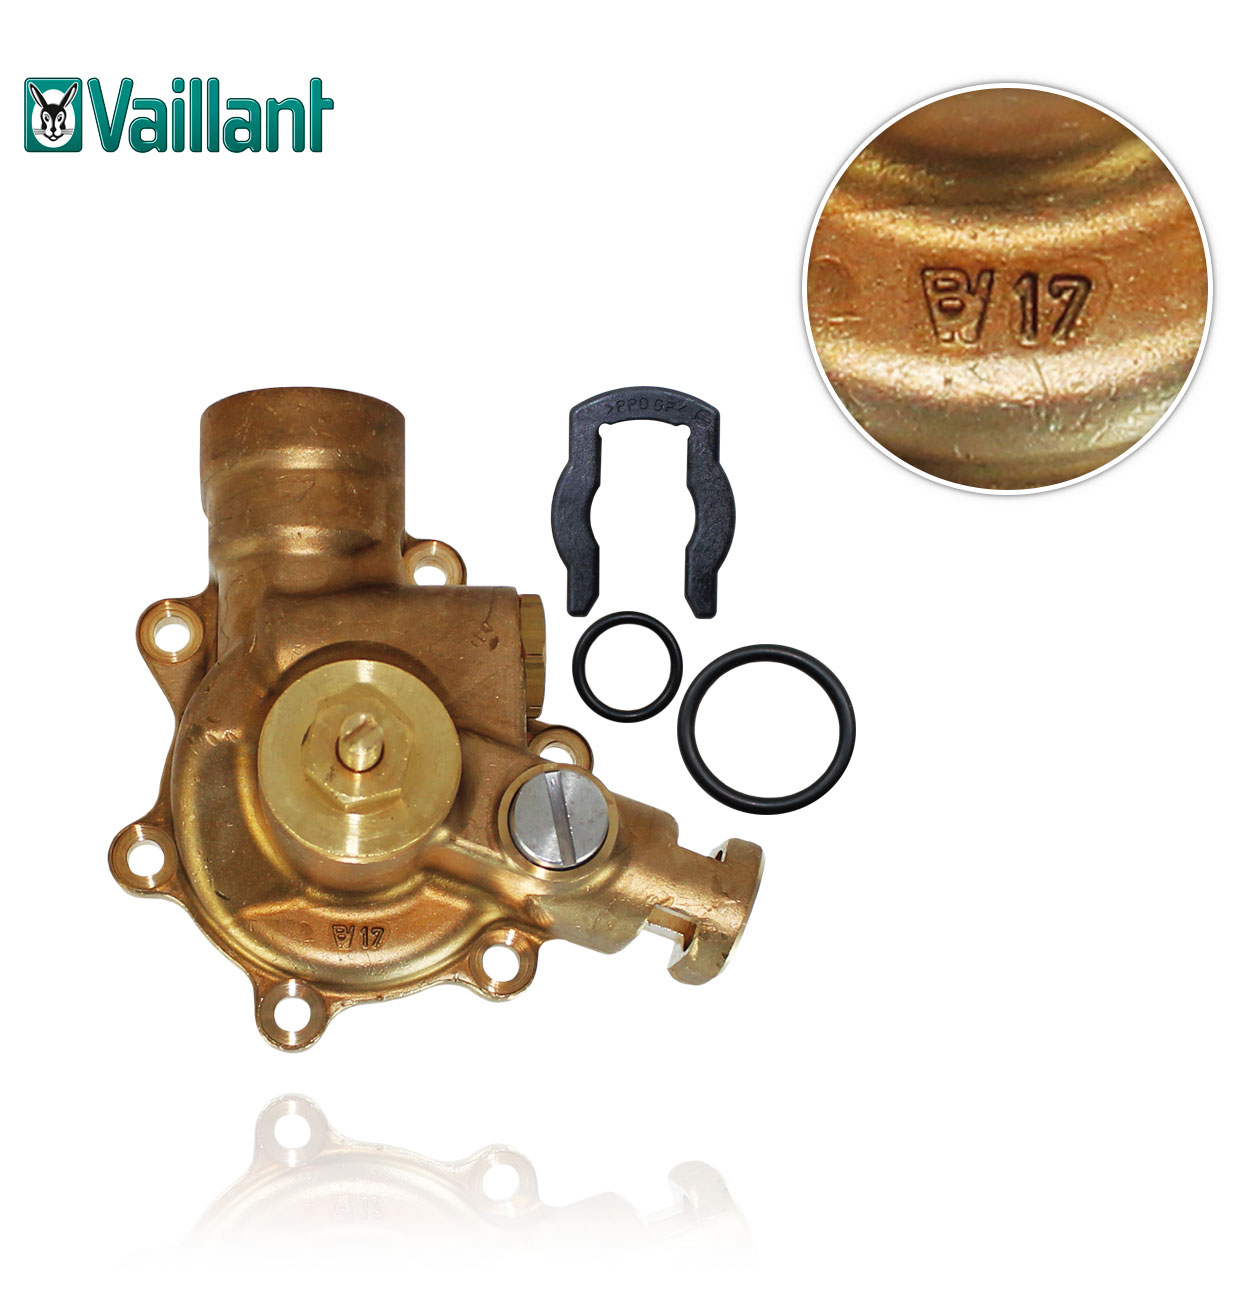 VMW VAILLANT 070704 / 013517 LOWER WATER GROUP